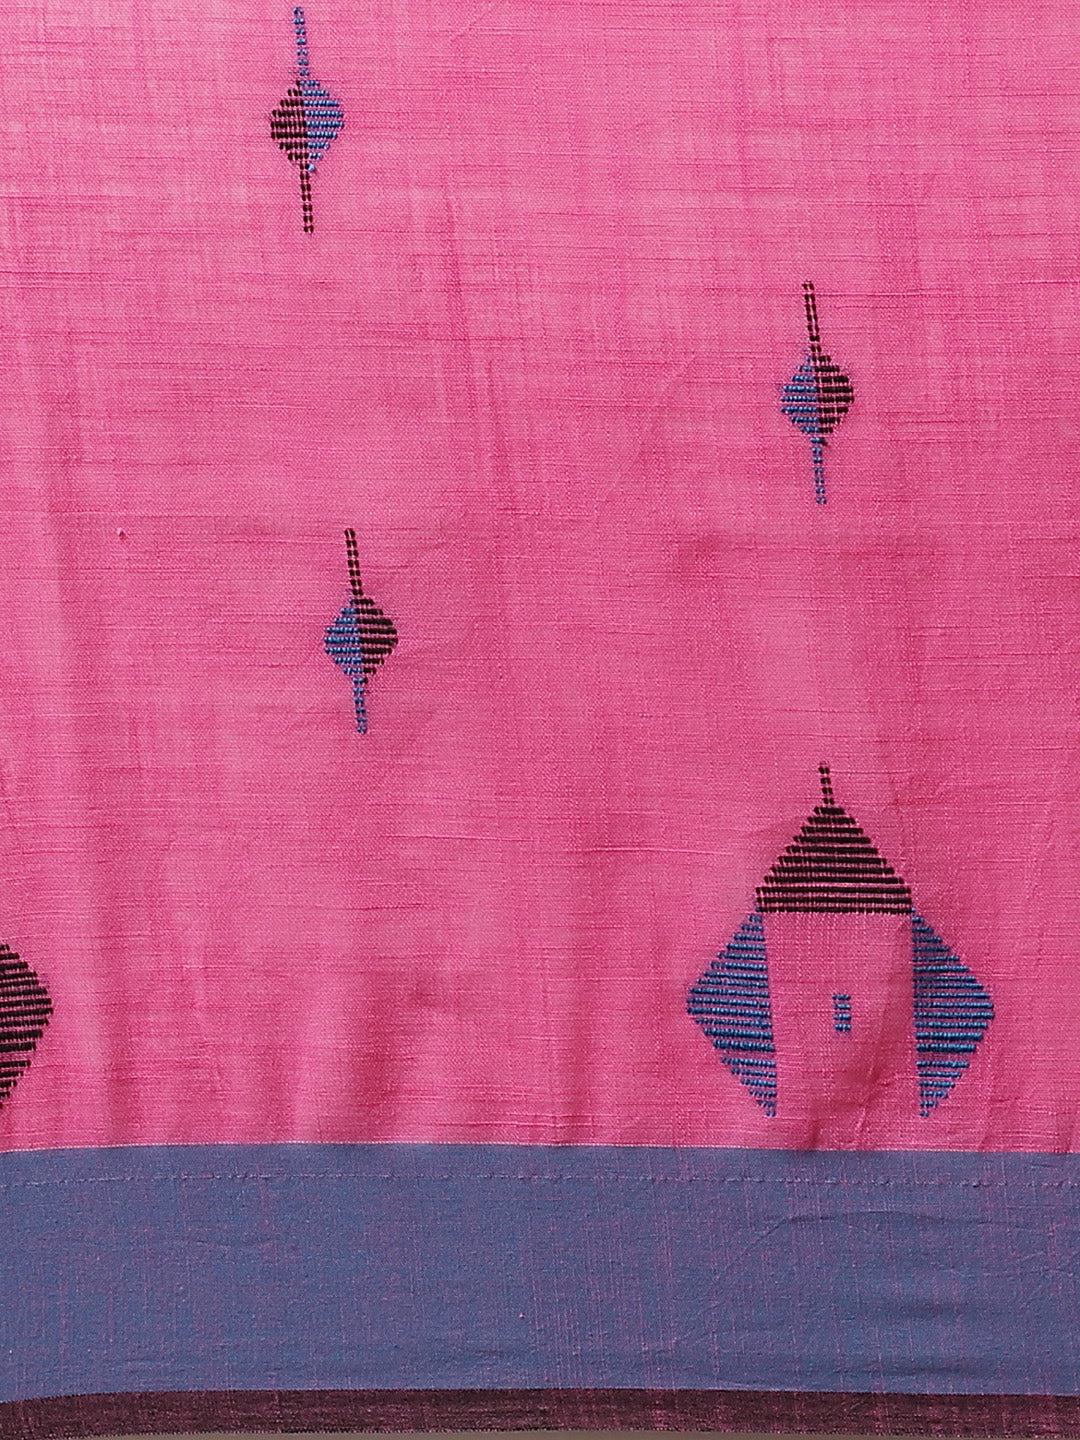 Pink and Magenta, Kalakari India Cotton Pink Hand crafted saree with blouse SHBESA0022-Saree-Kalakari India-SHBESA0022-Bengal, Cotton, Geographical Indication, Hand Crafted, Heritage Prints, Ikkat, Natural Dyes, Red, Sarees, Sustainable Fabrics, Woven, Yellow-[Linen,Ethnic,wear,Fashionista,Handloom,Handicraft,Indigo,blockprint,block,print,Cotton,Chanderi,Blue, latest,classy,party,bollywood,trendy,summer,style,traditional,formal,elegant,unique,style,hand,block,print, dabu,booti,gift,present,glamo